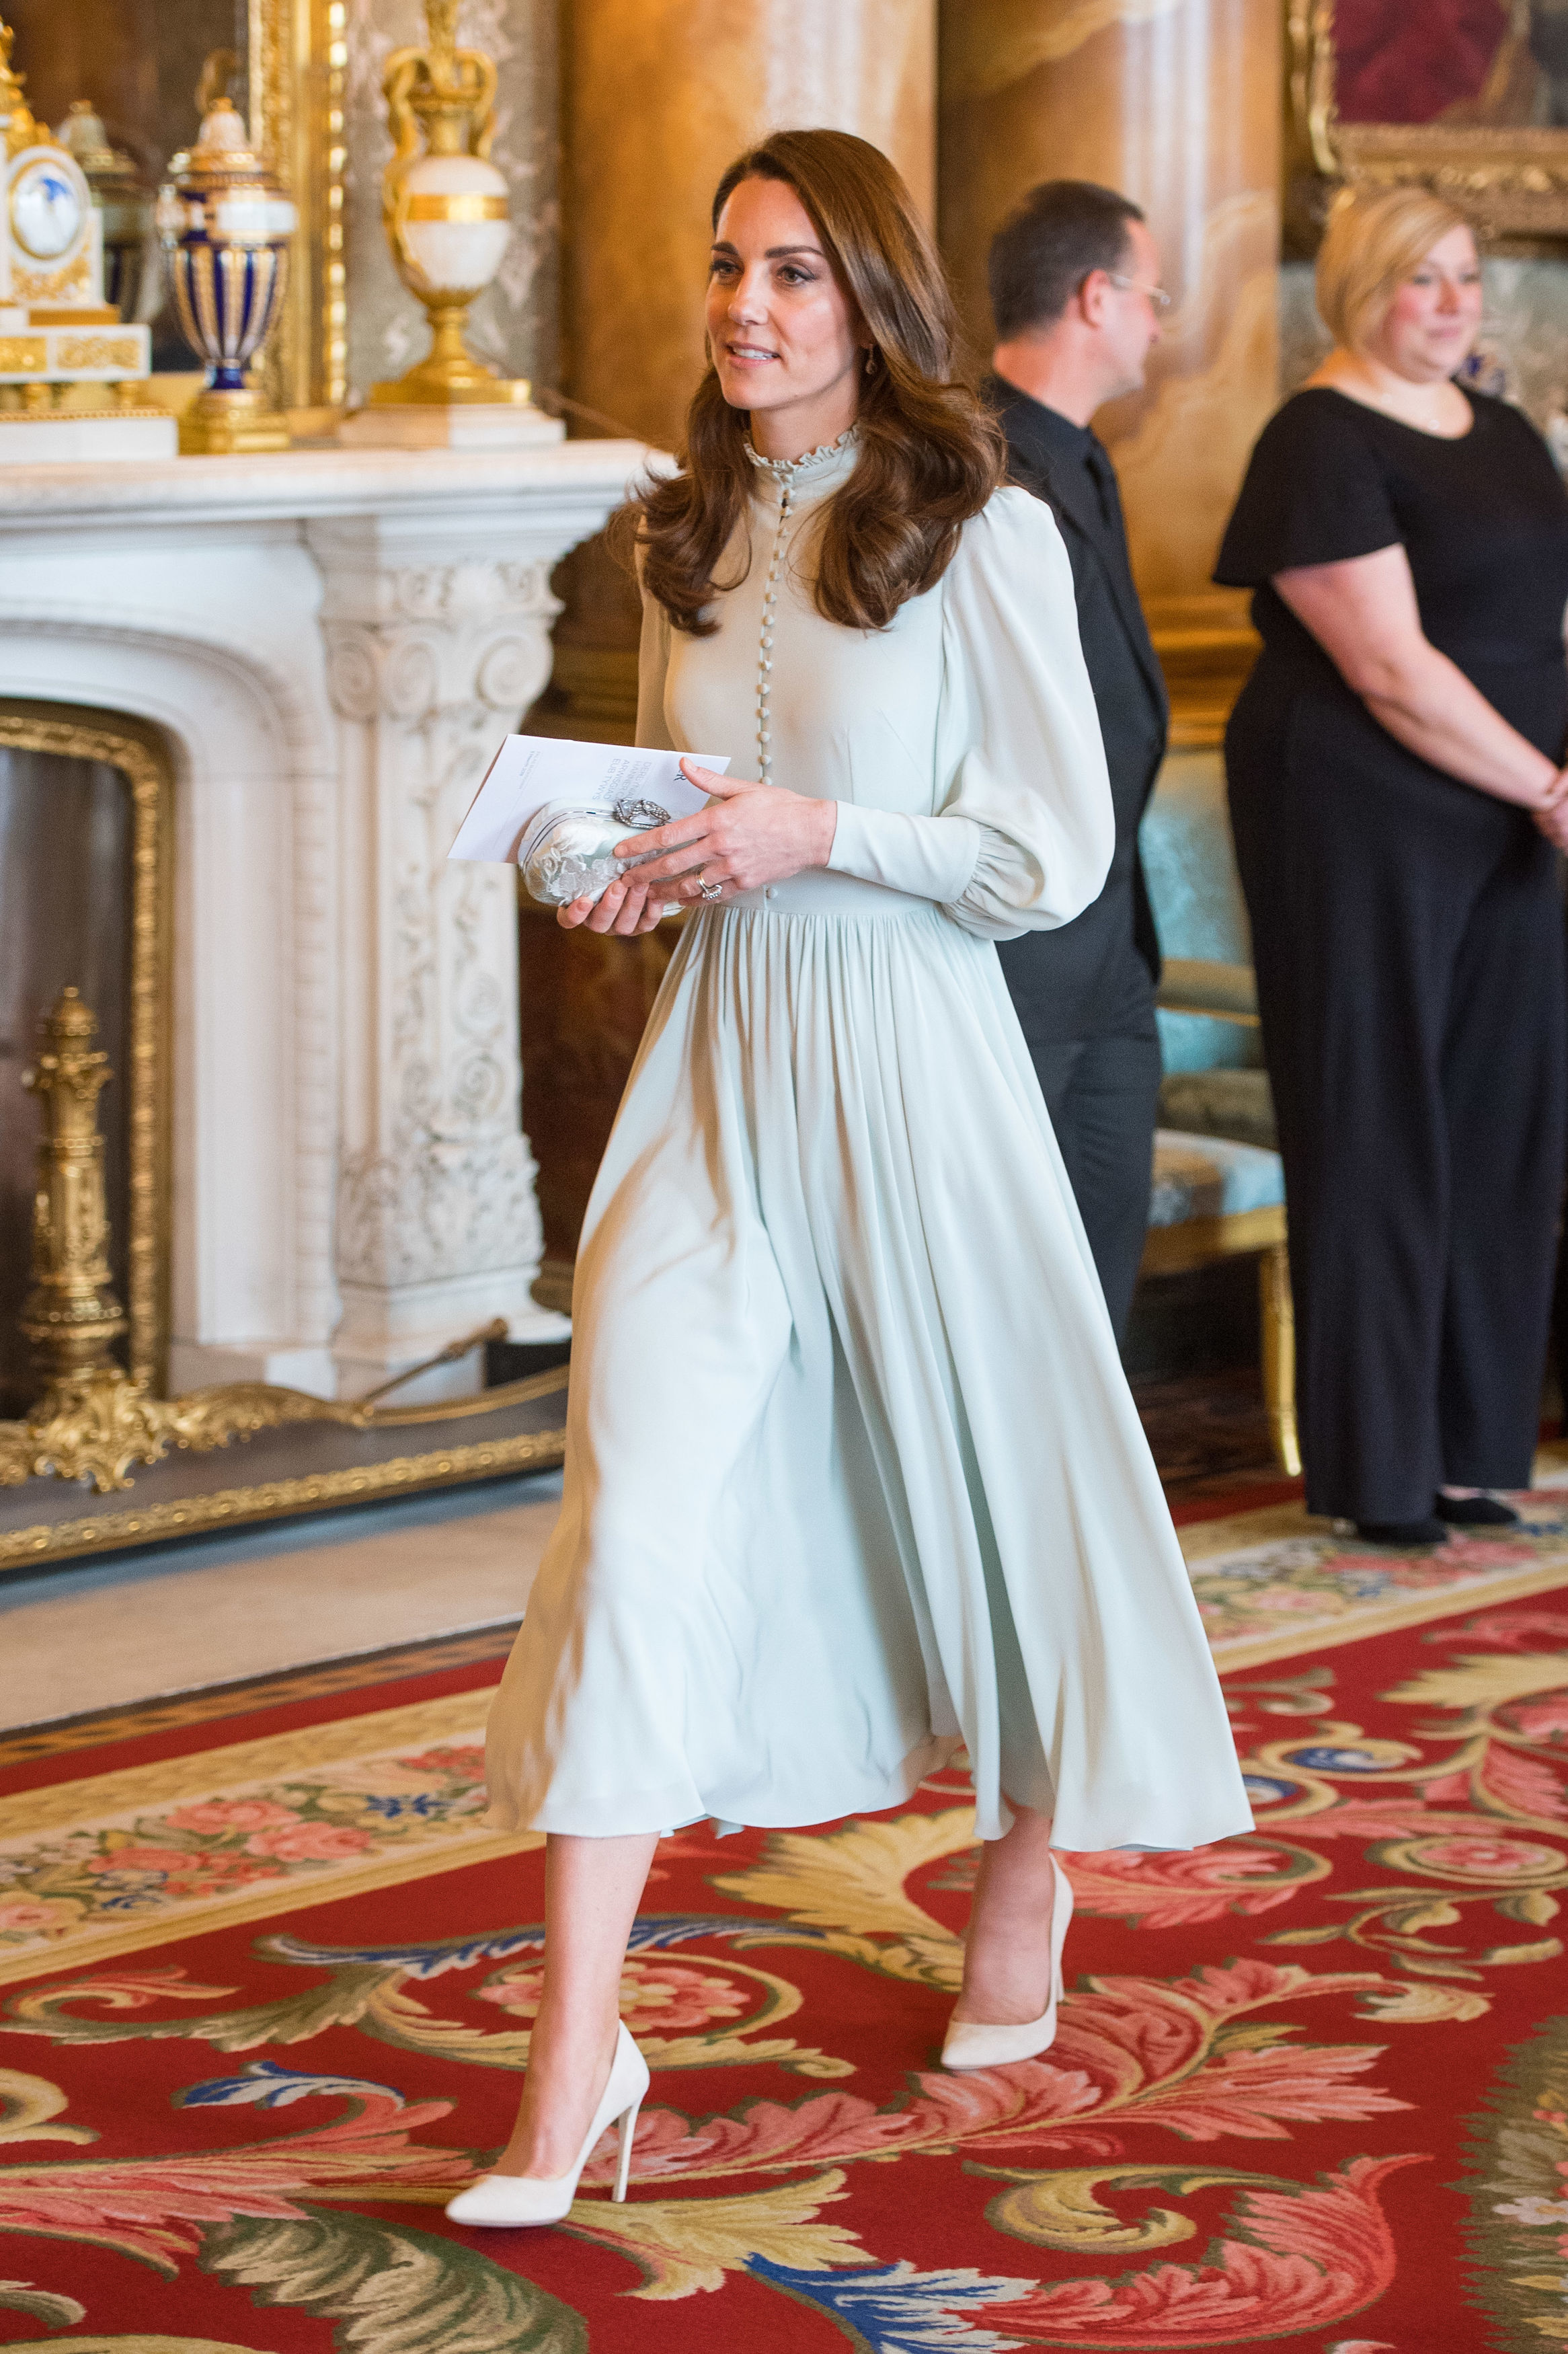 The Duchess of Cambridge attends a reception at Buckingham Palace